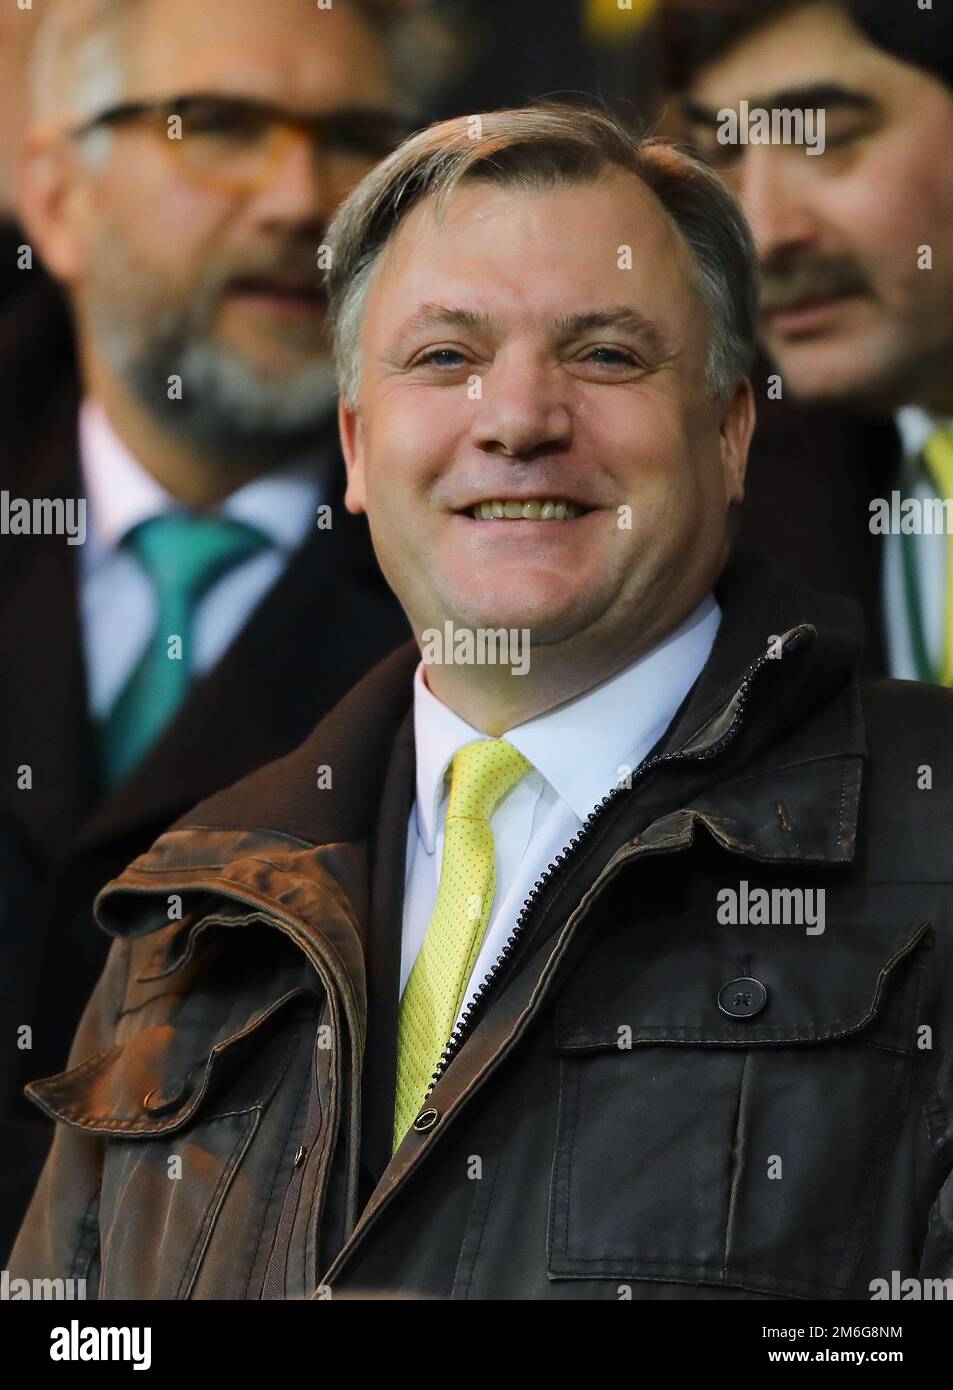 Chairman of Norwich City, Ed Balls looks on in his first game at Carrow Road since leaving Strictly Come Dancing - Norwich City v Brentford, Sky Bet Championship, Carrow Road, Norwich - 3rd December 2016. Stock Photo